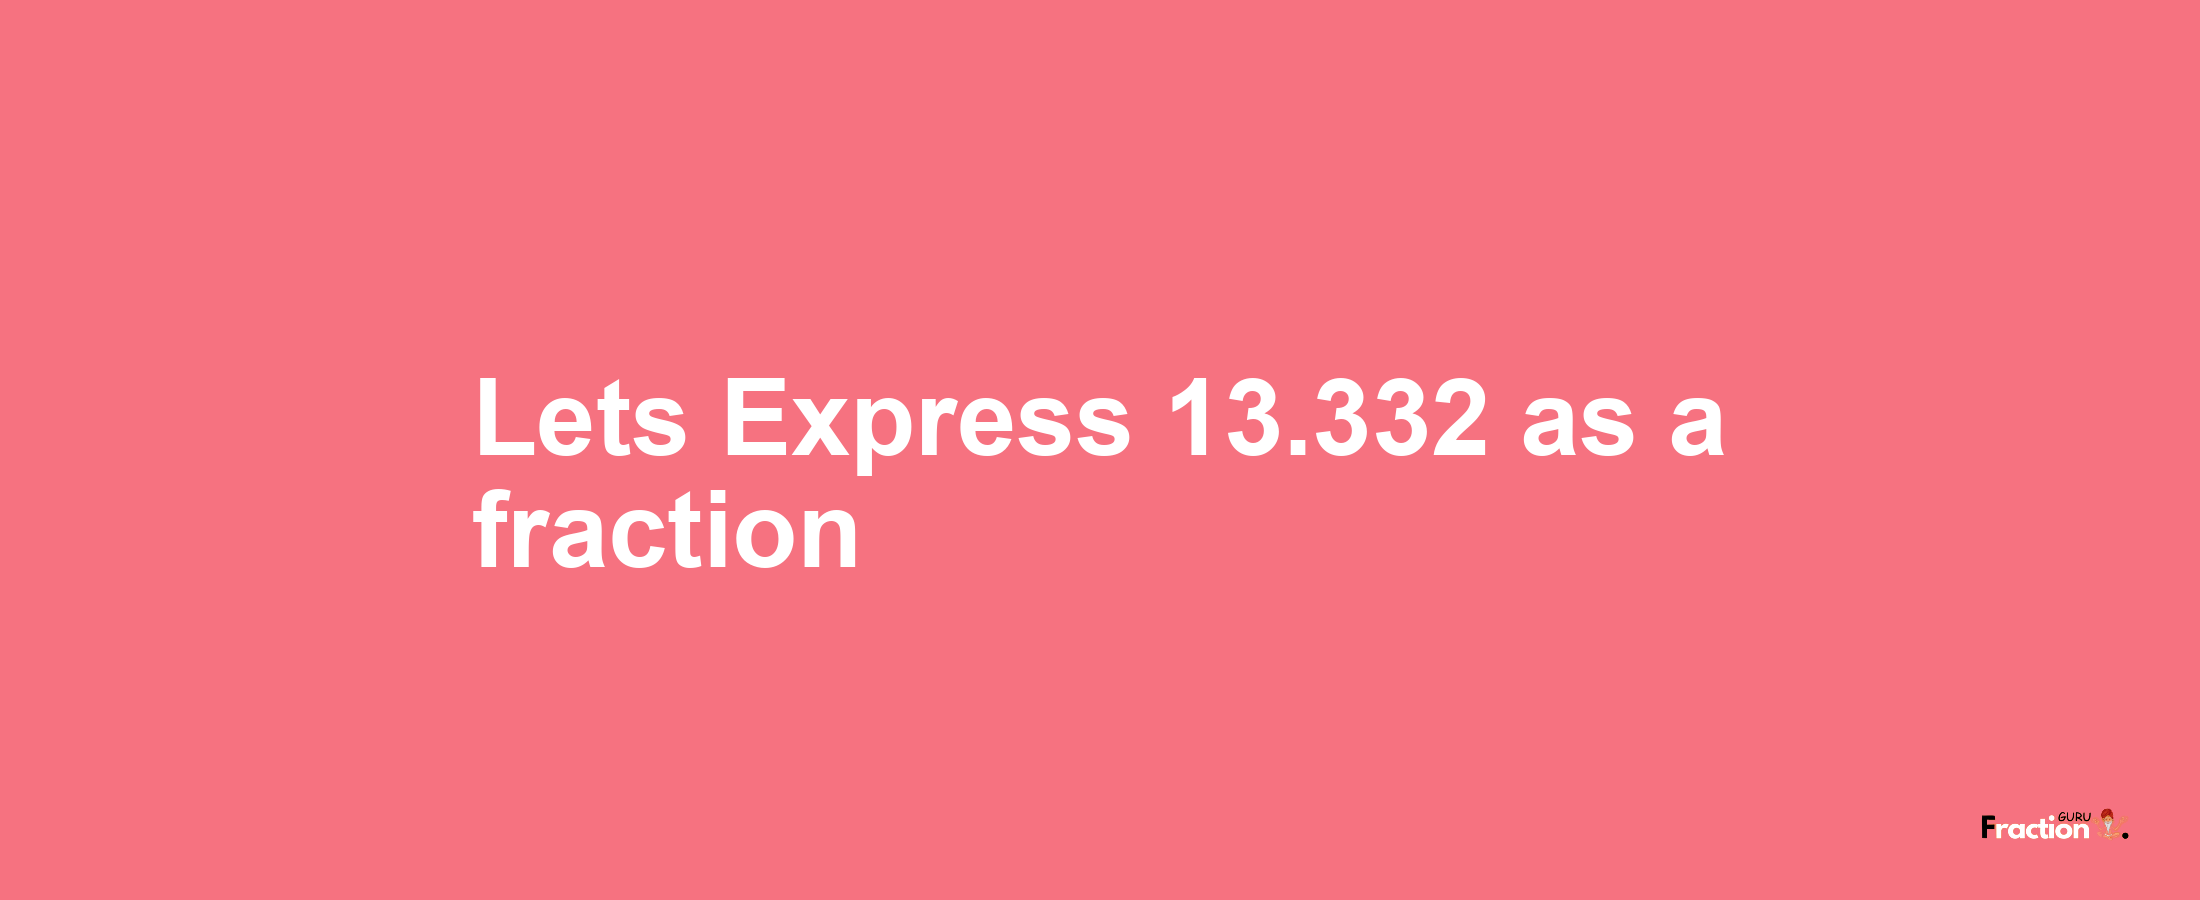 Lets Express 13.332 as afraction